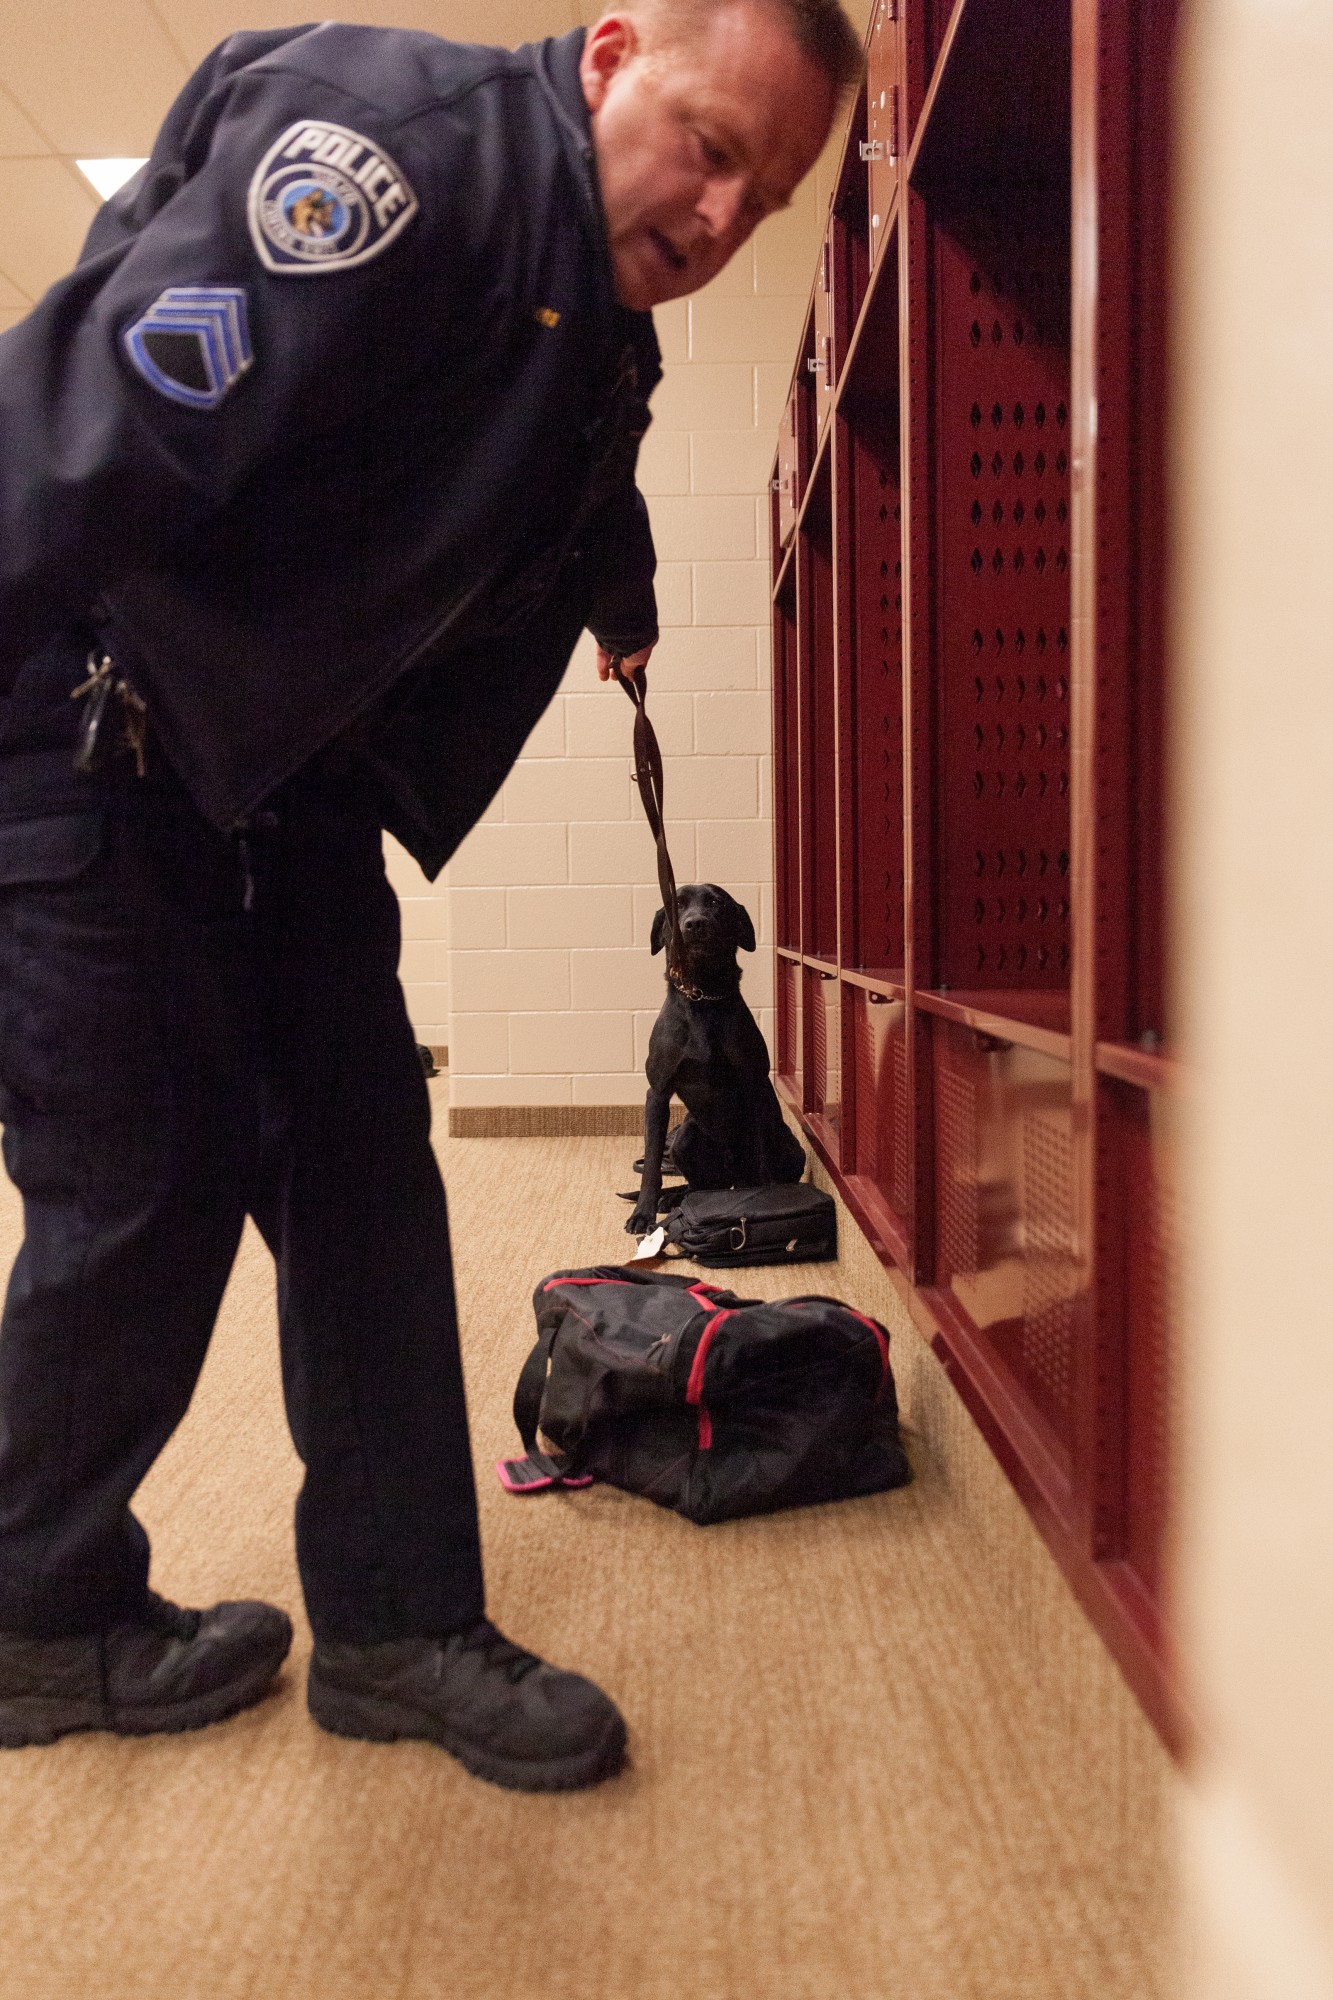 UMPD K-9 Handler Sergeant Ryan Rivers tugs on the lead to demonstrate how his canine, Doc, signals that he has found a potential explosives threat at TCF Bank Stadium on Tuesday, Feb. 25.